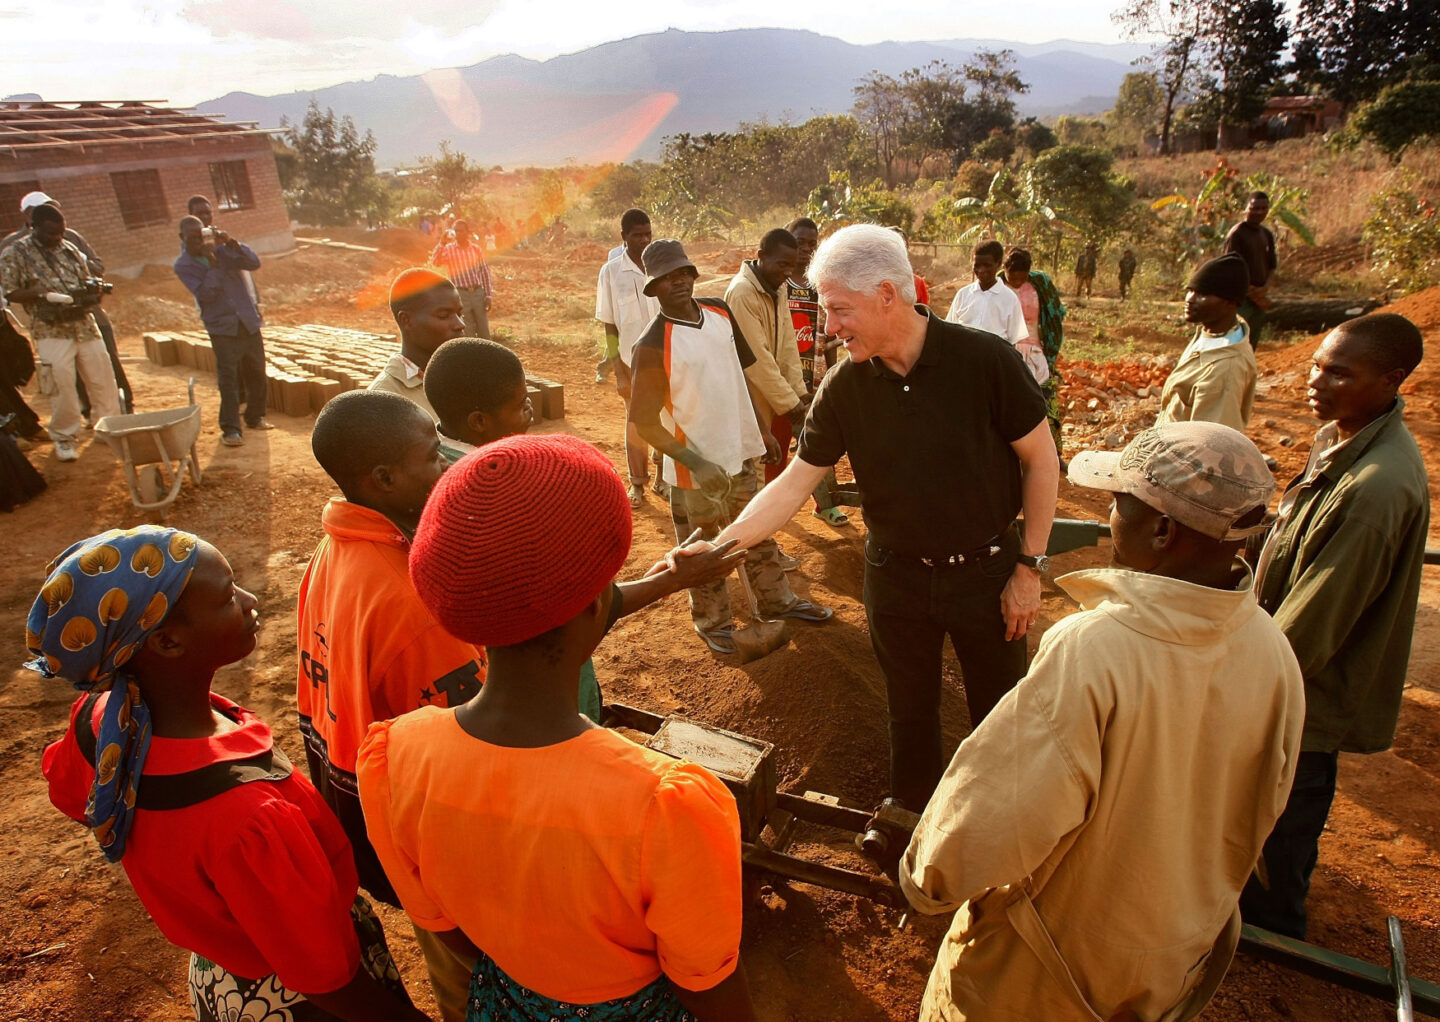 President Clinton shakes hands with locals and workers at a construction site in Africa